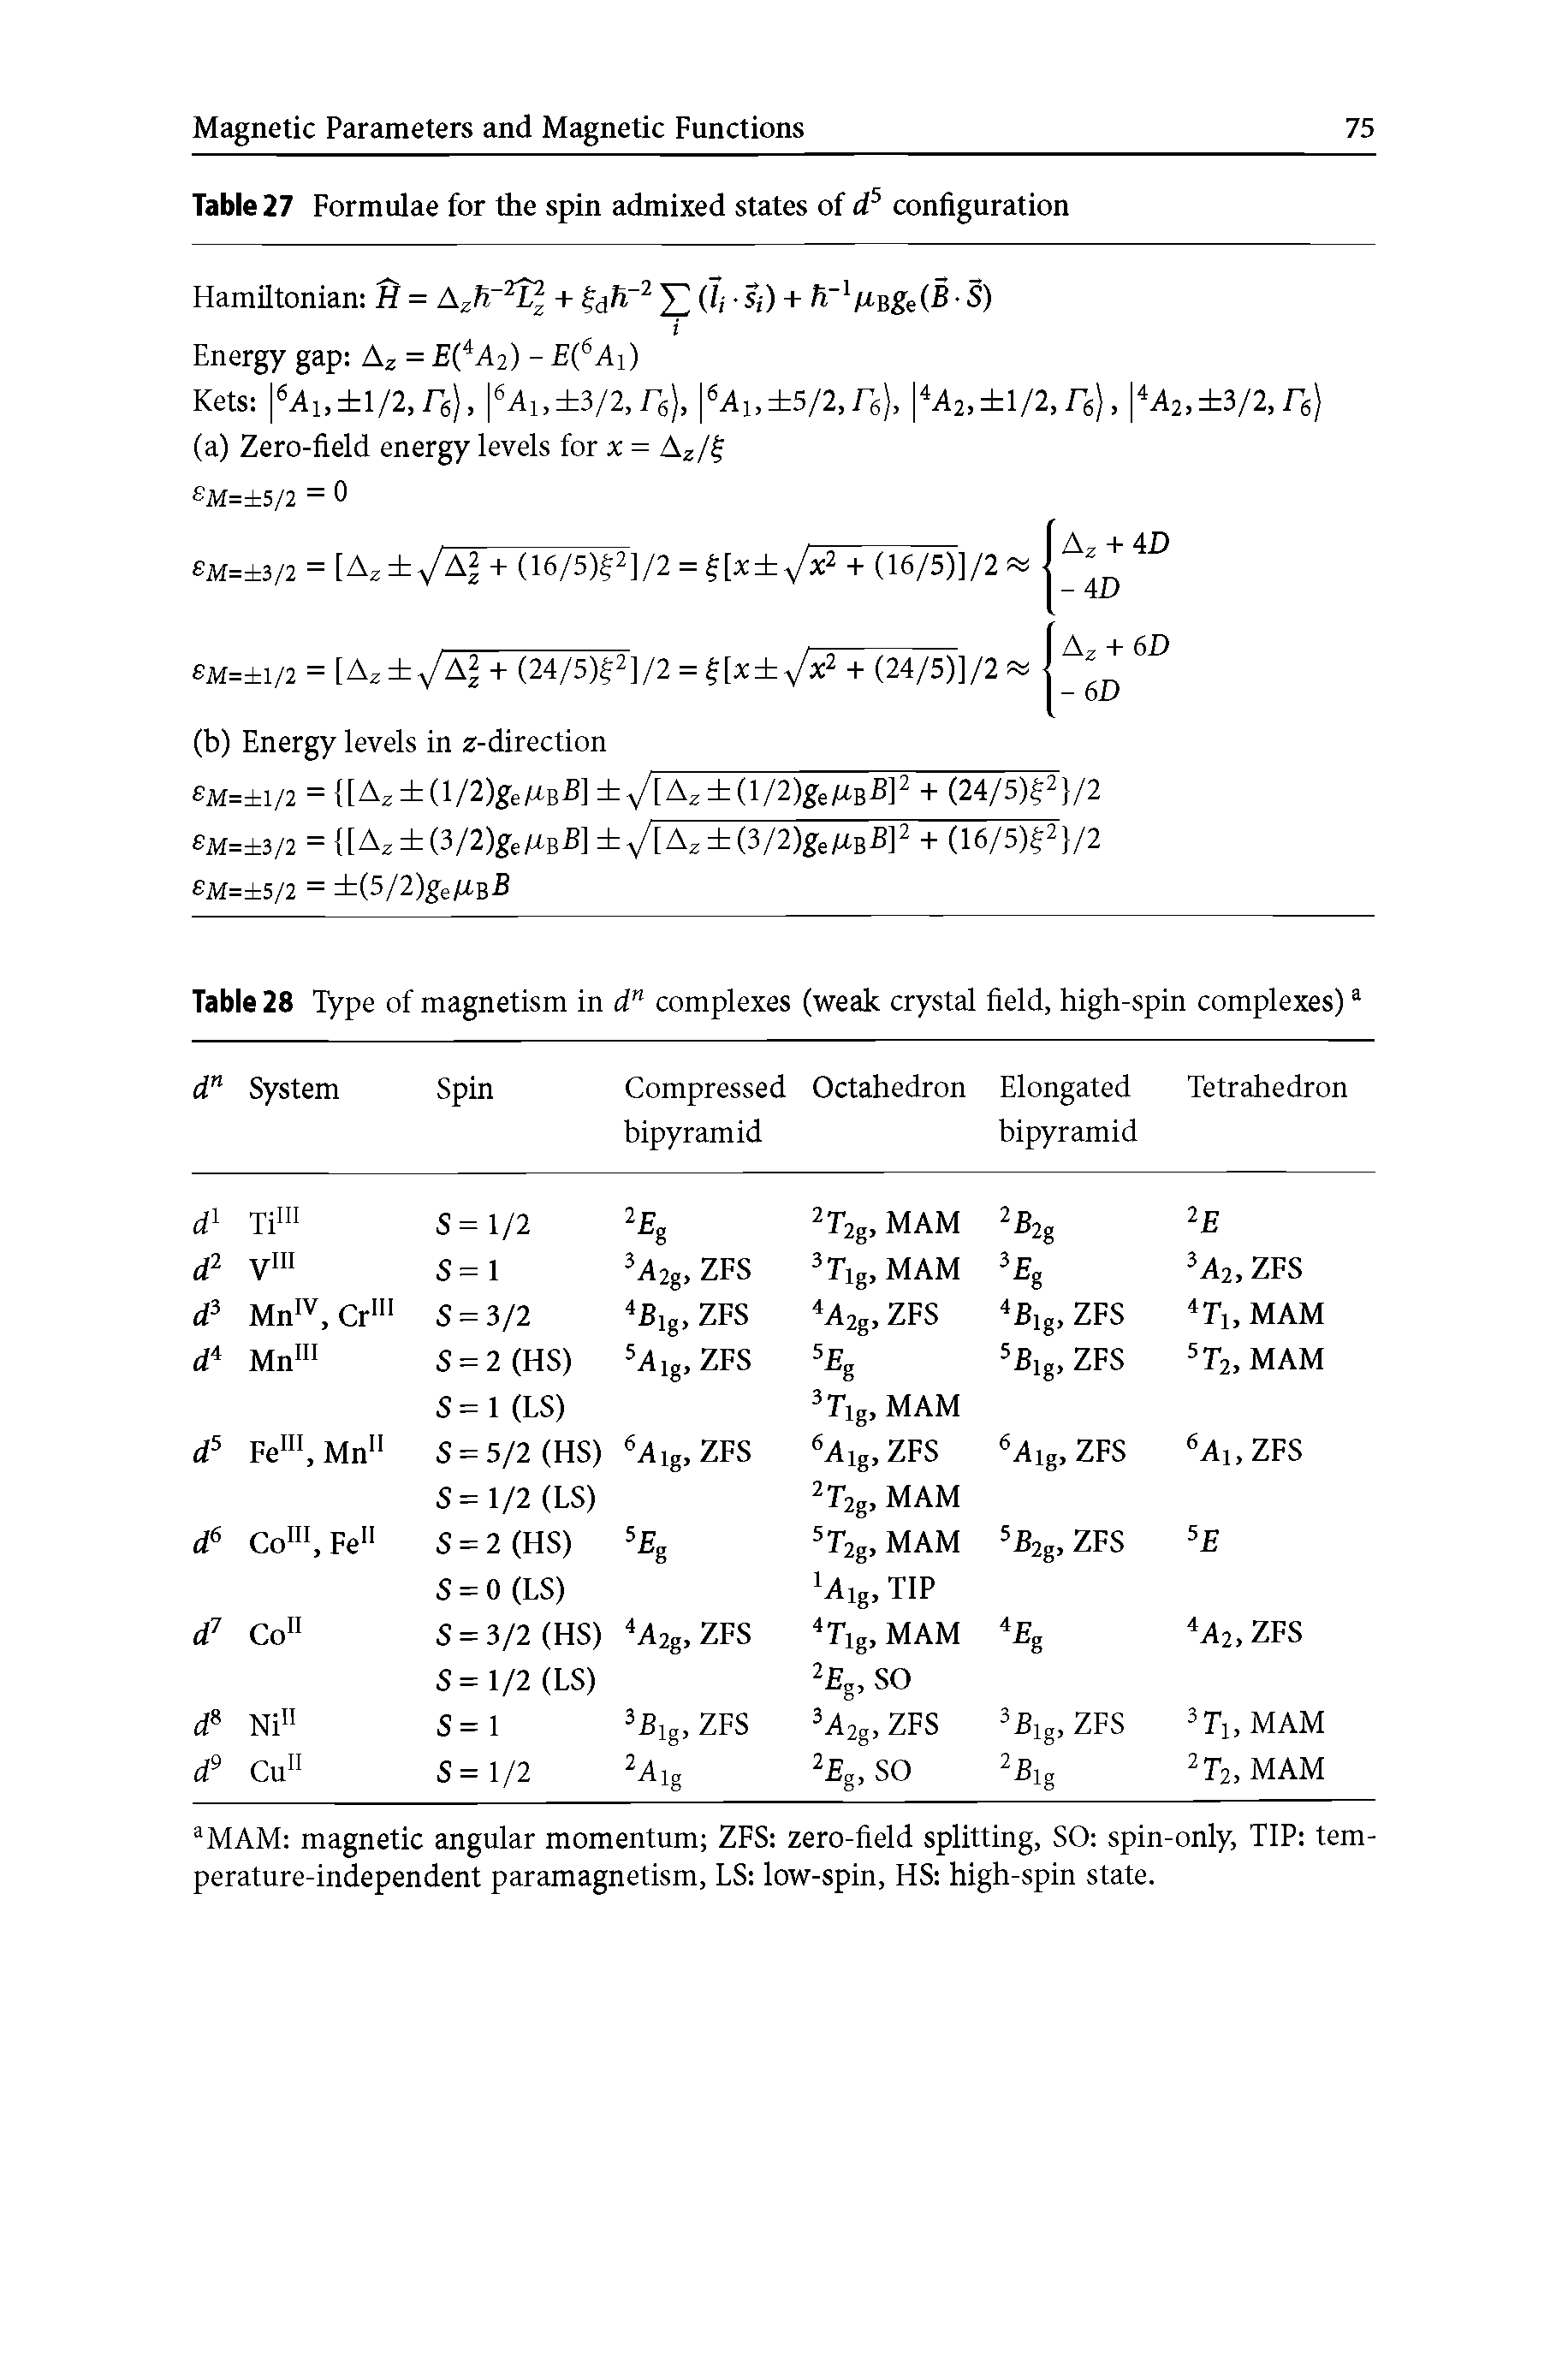 Table 28 Type of magnetism in d complexes (weak crystal field, high-spin complexes)...